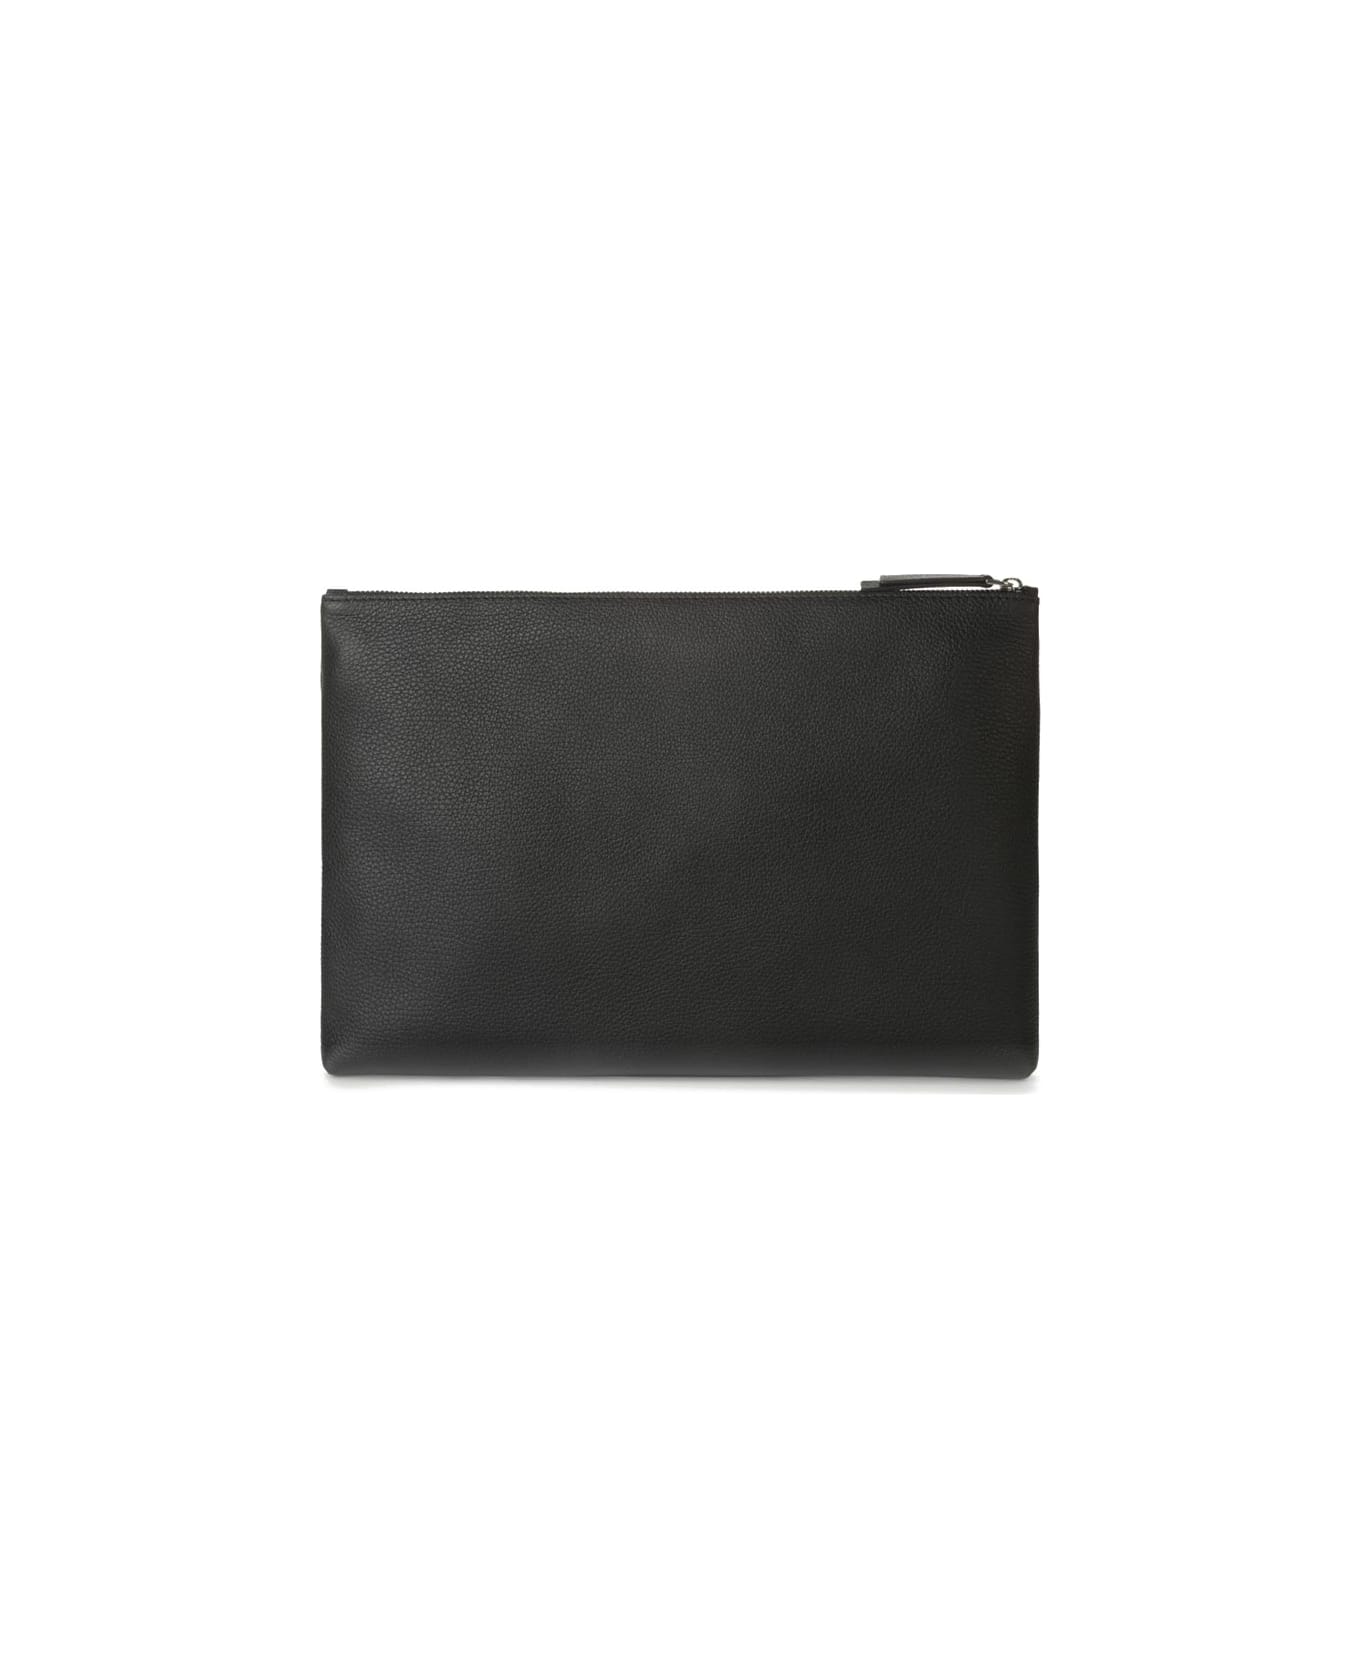 Orciani Leather Clutch Bag - NERO トラベルバッグ